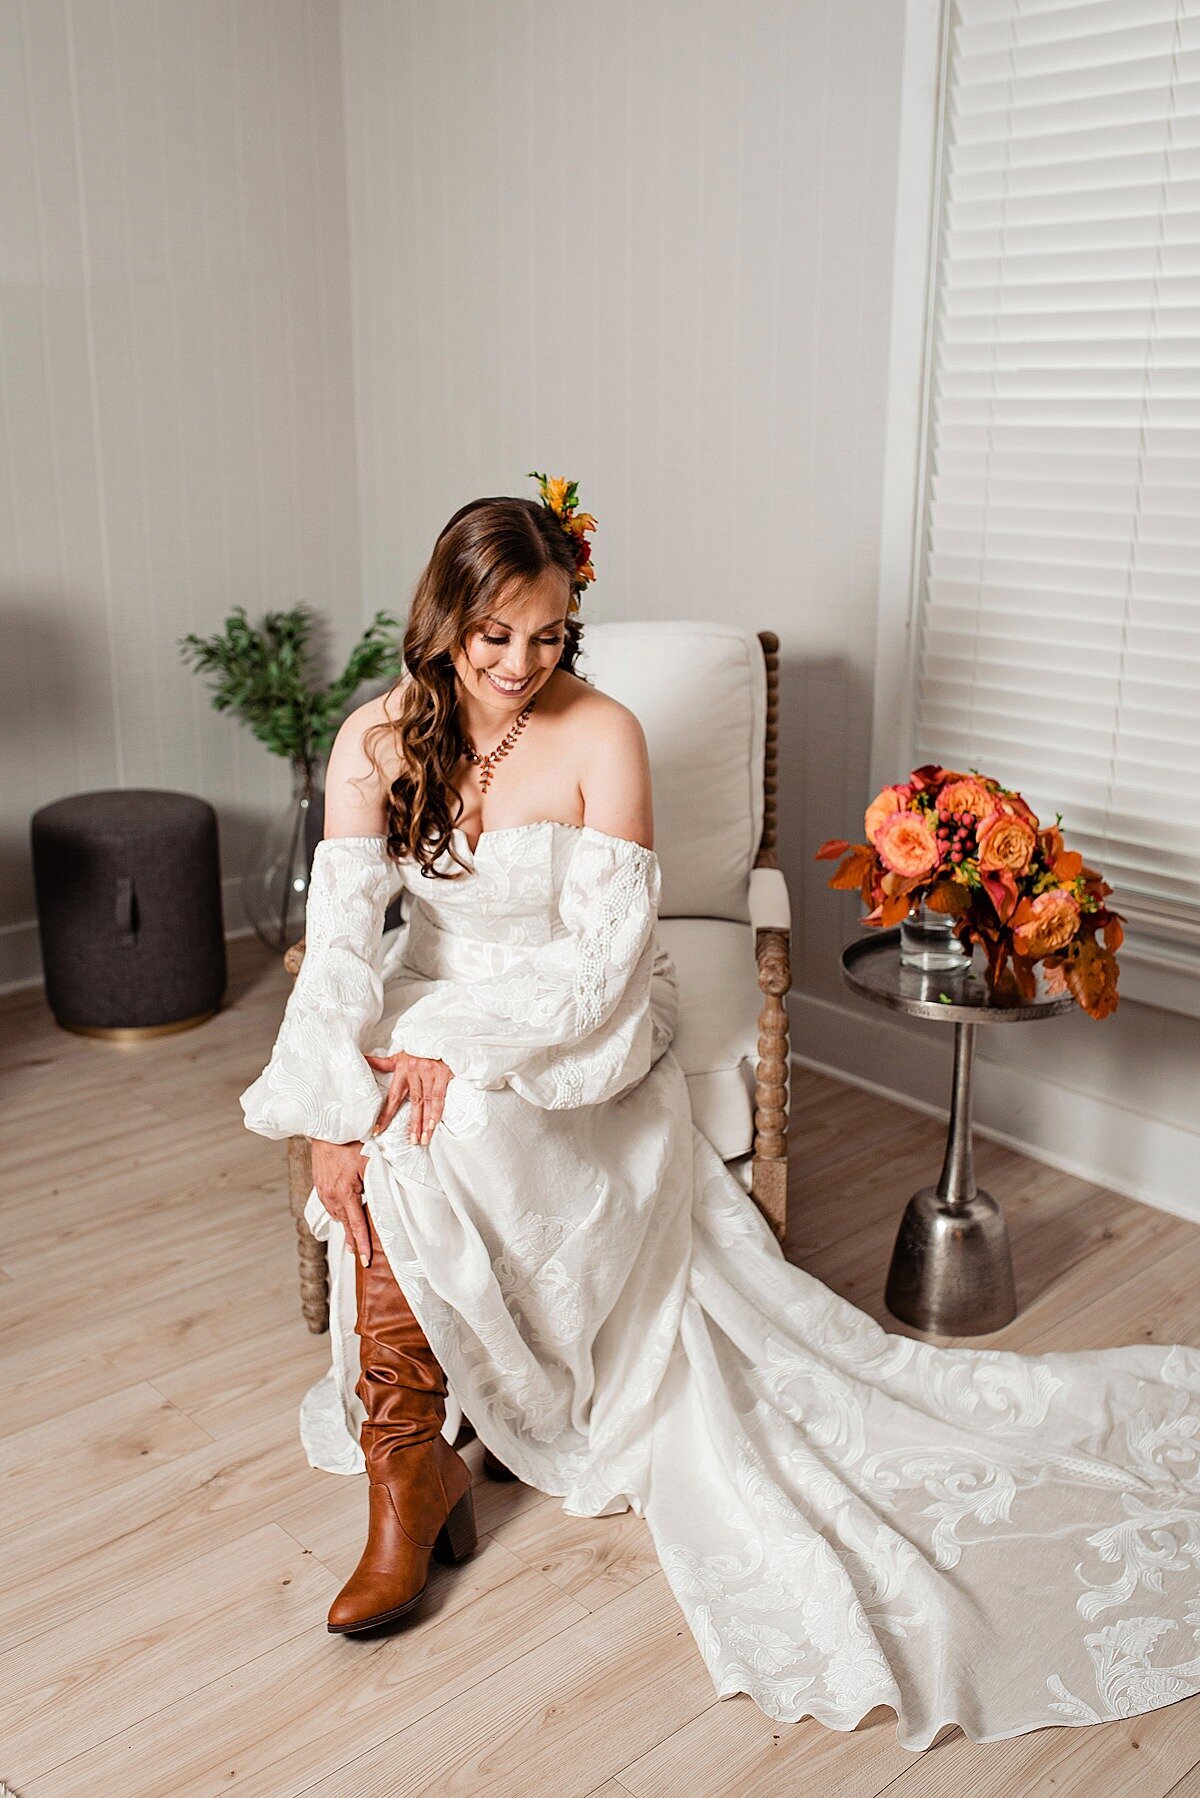 The boho bride is seated in a chair next to a silver table with her bouquet of orange flowers and dried autumn leaves. She is wearing a flowing sleeveless ivory gown with an empire waist and detachable sleeves. She is leaning down to put on knee high brown leather boots.